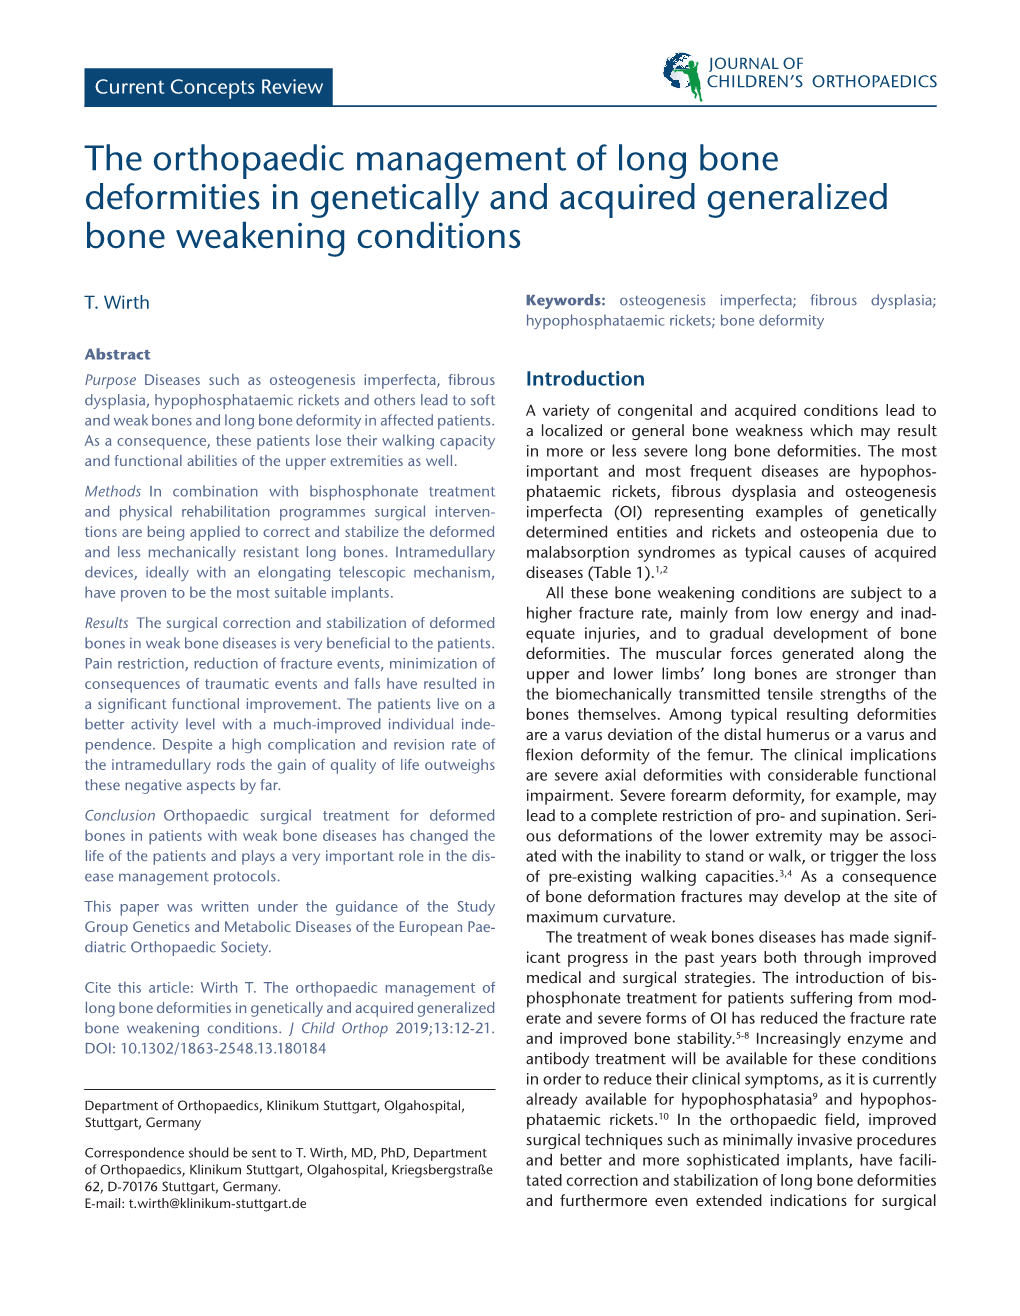 The Orthopaedic Management of Long Bone Deformities in Genetically and Acquired Generalized Bone Weakening Conditions